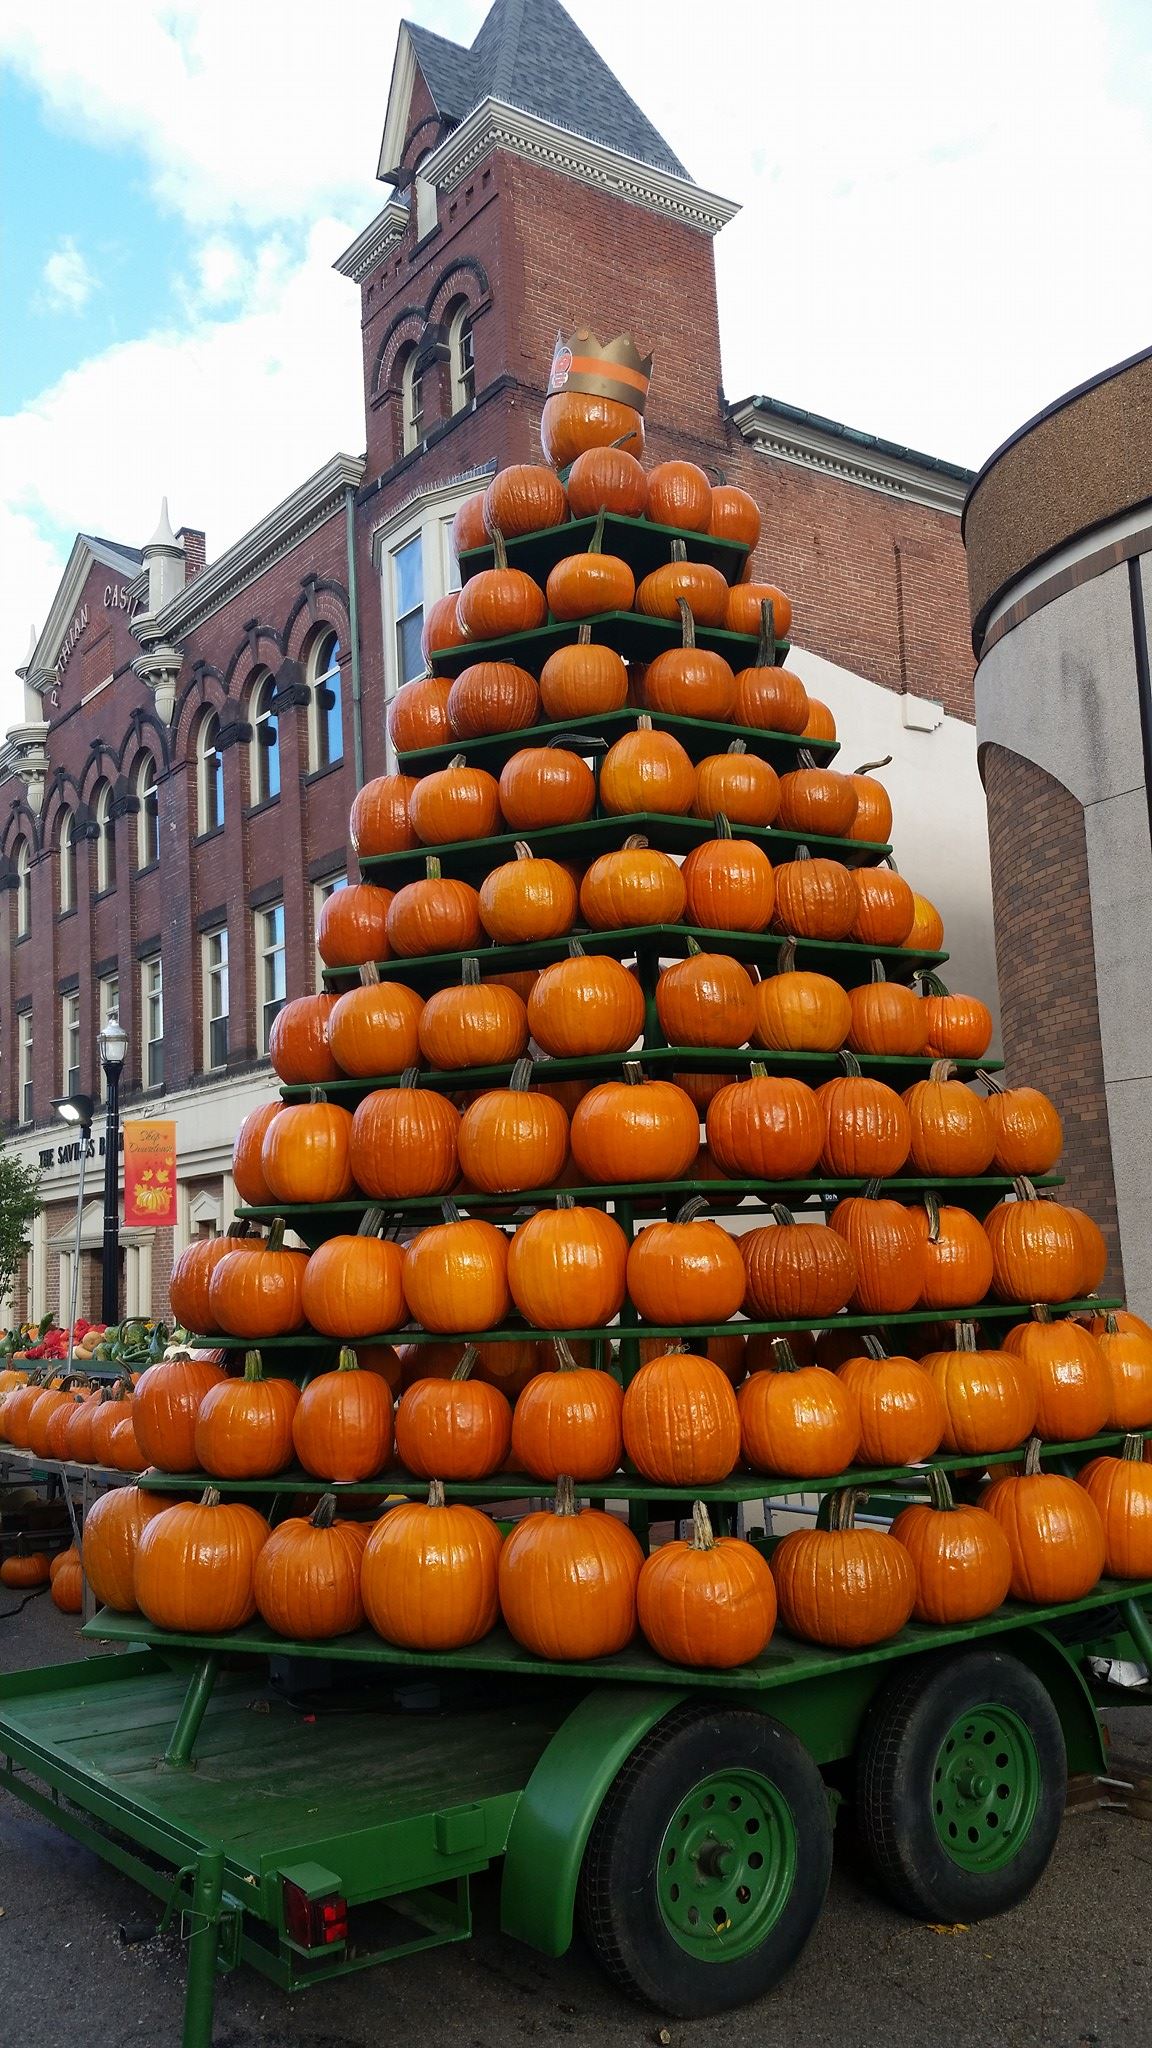 This Central Ohio pumpkin festival is one of the biggest in the entire